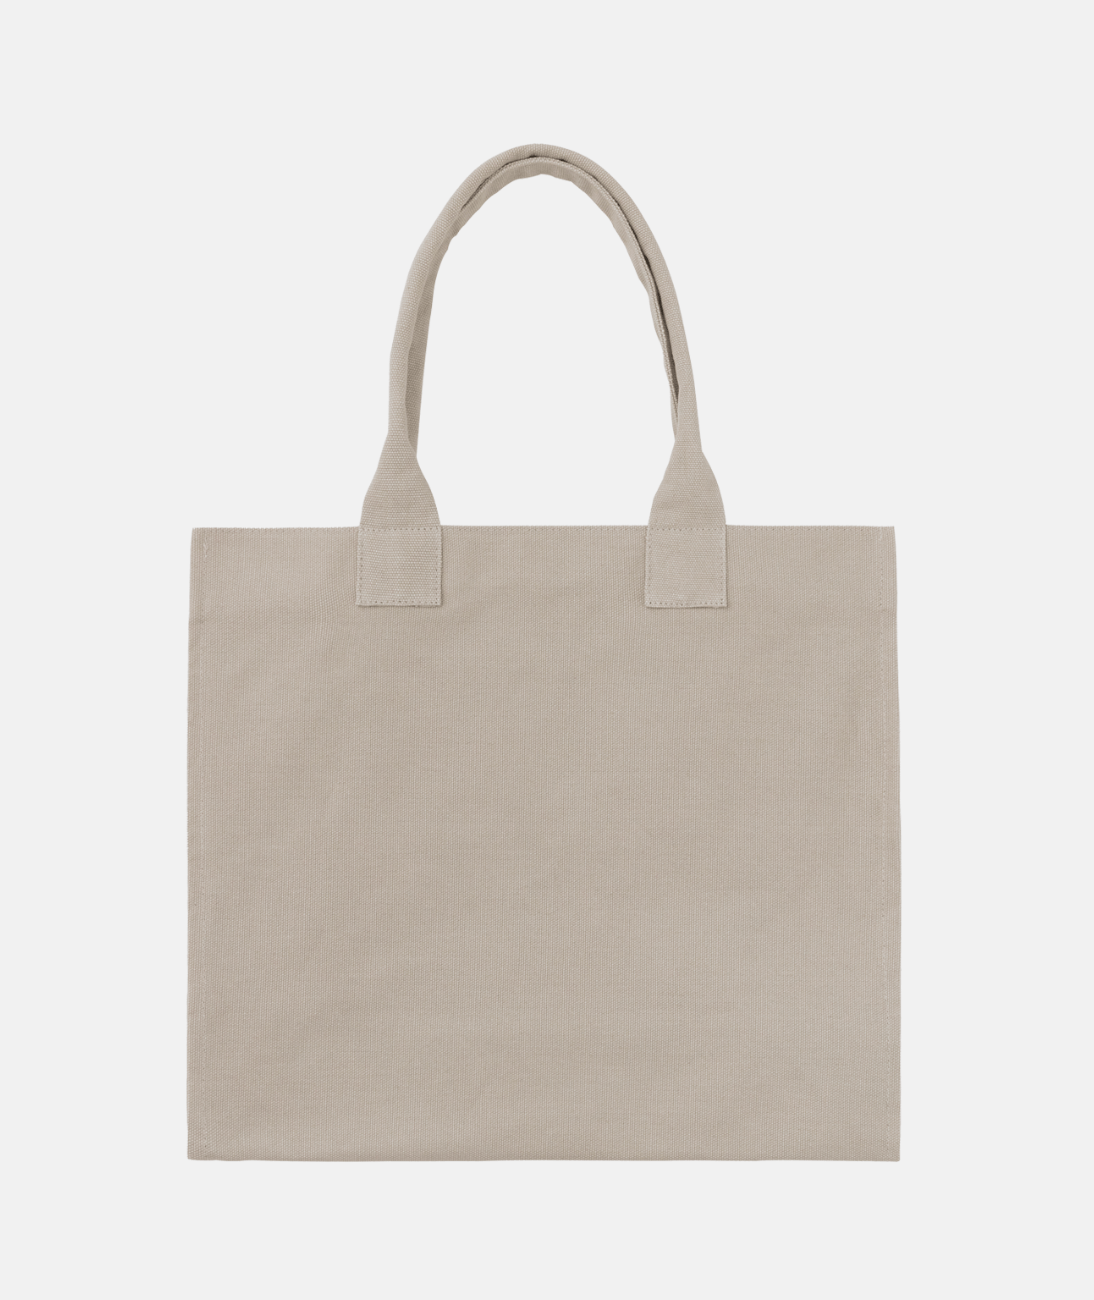 Blank Canvas Tote Bags  Heavy and Suitable for Daily Use